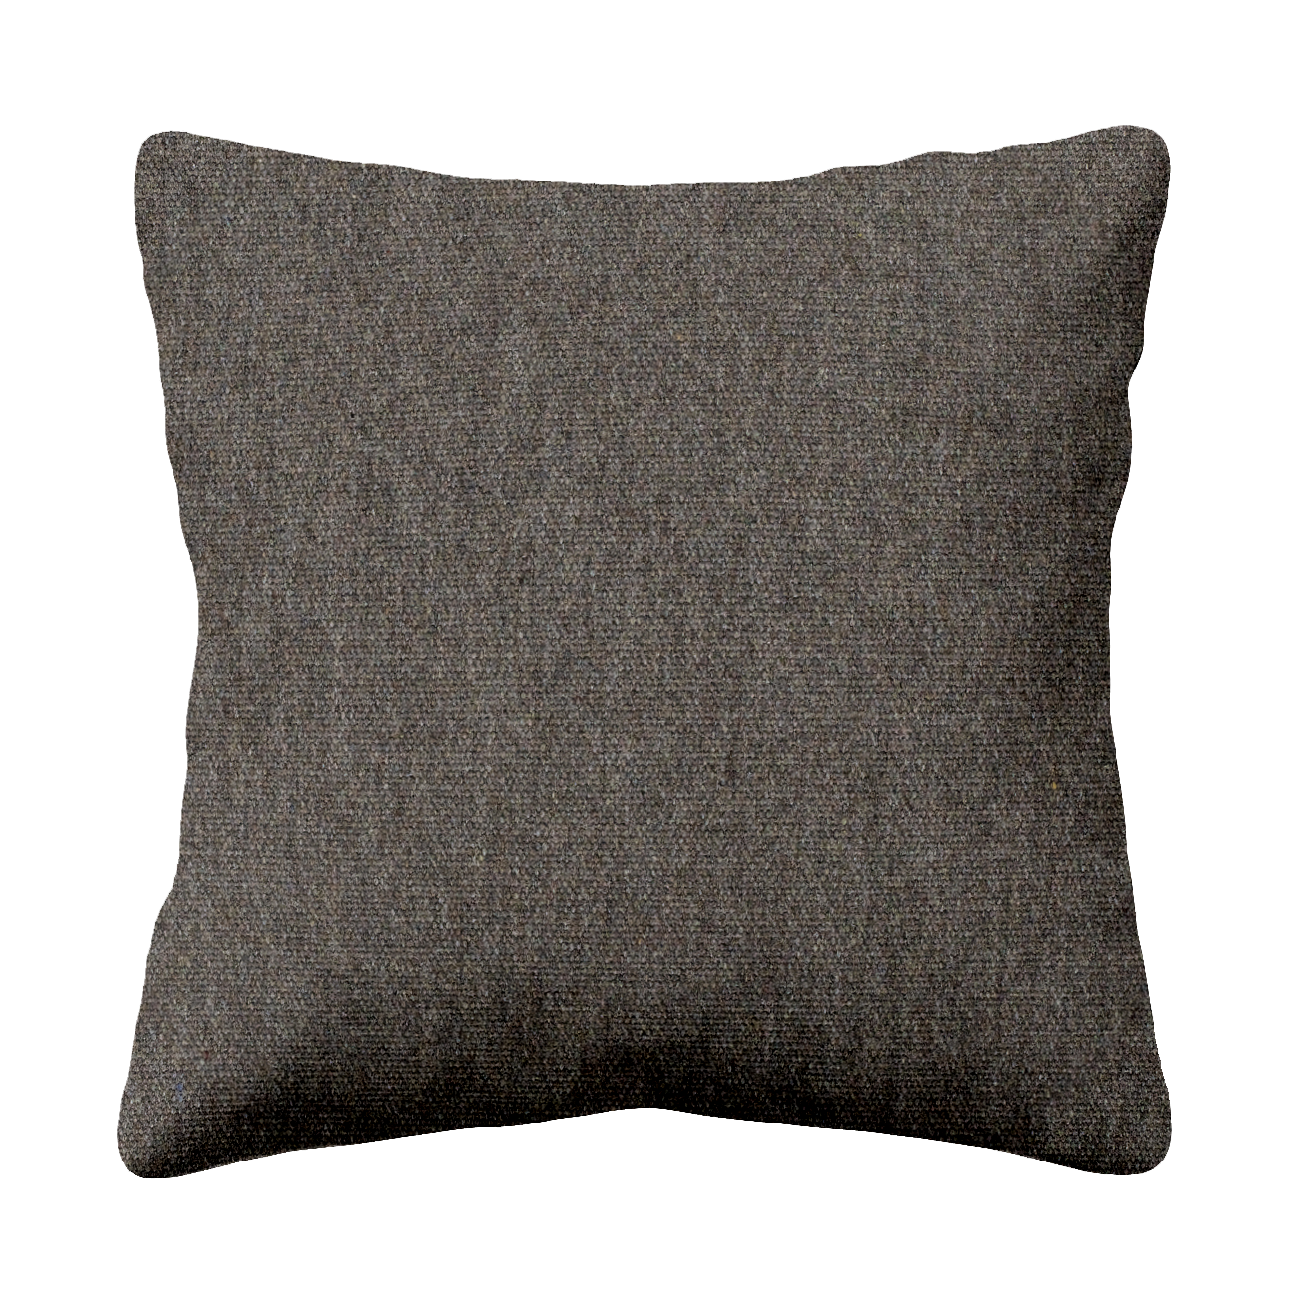 Heritage Granite Sunbrella Outdoor Cushion without piping (Discontinued Fabric)